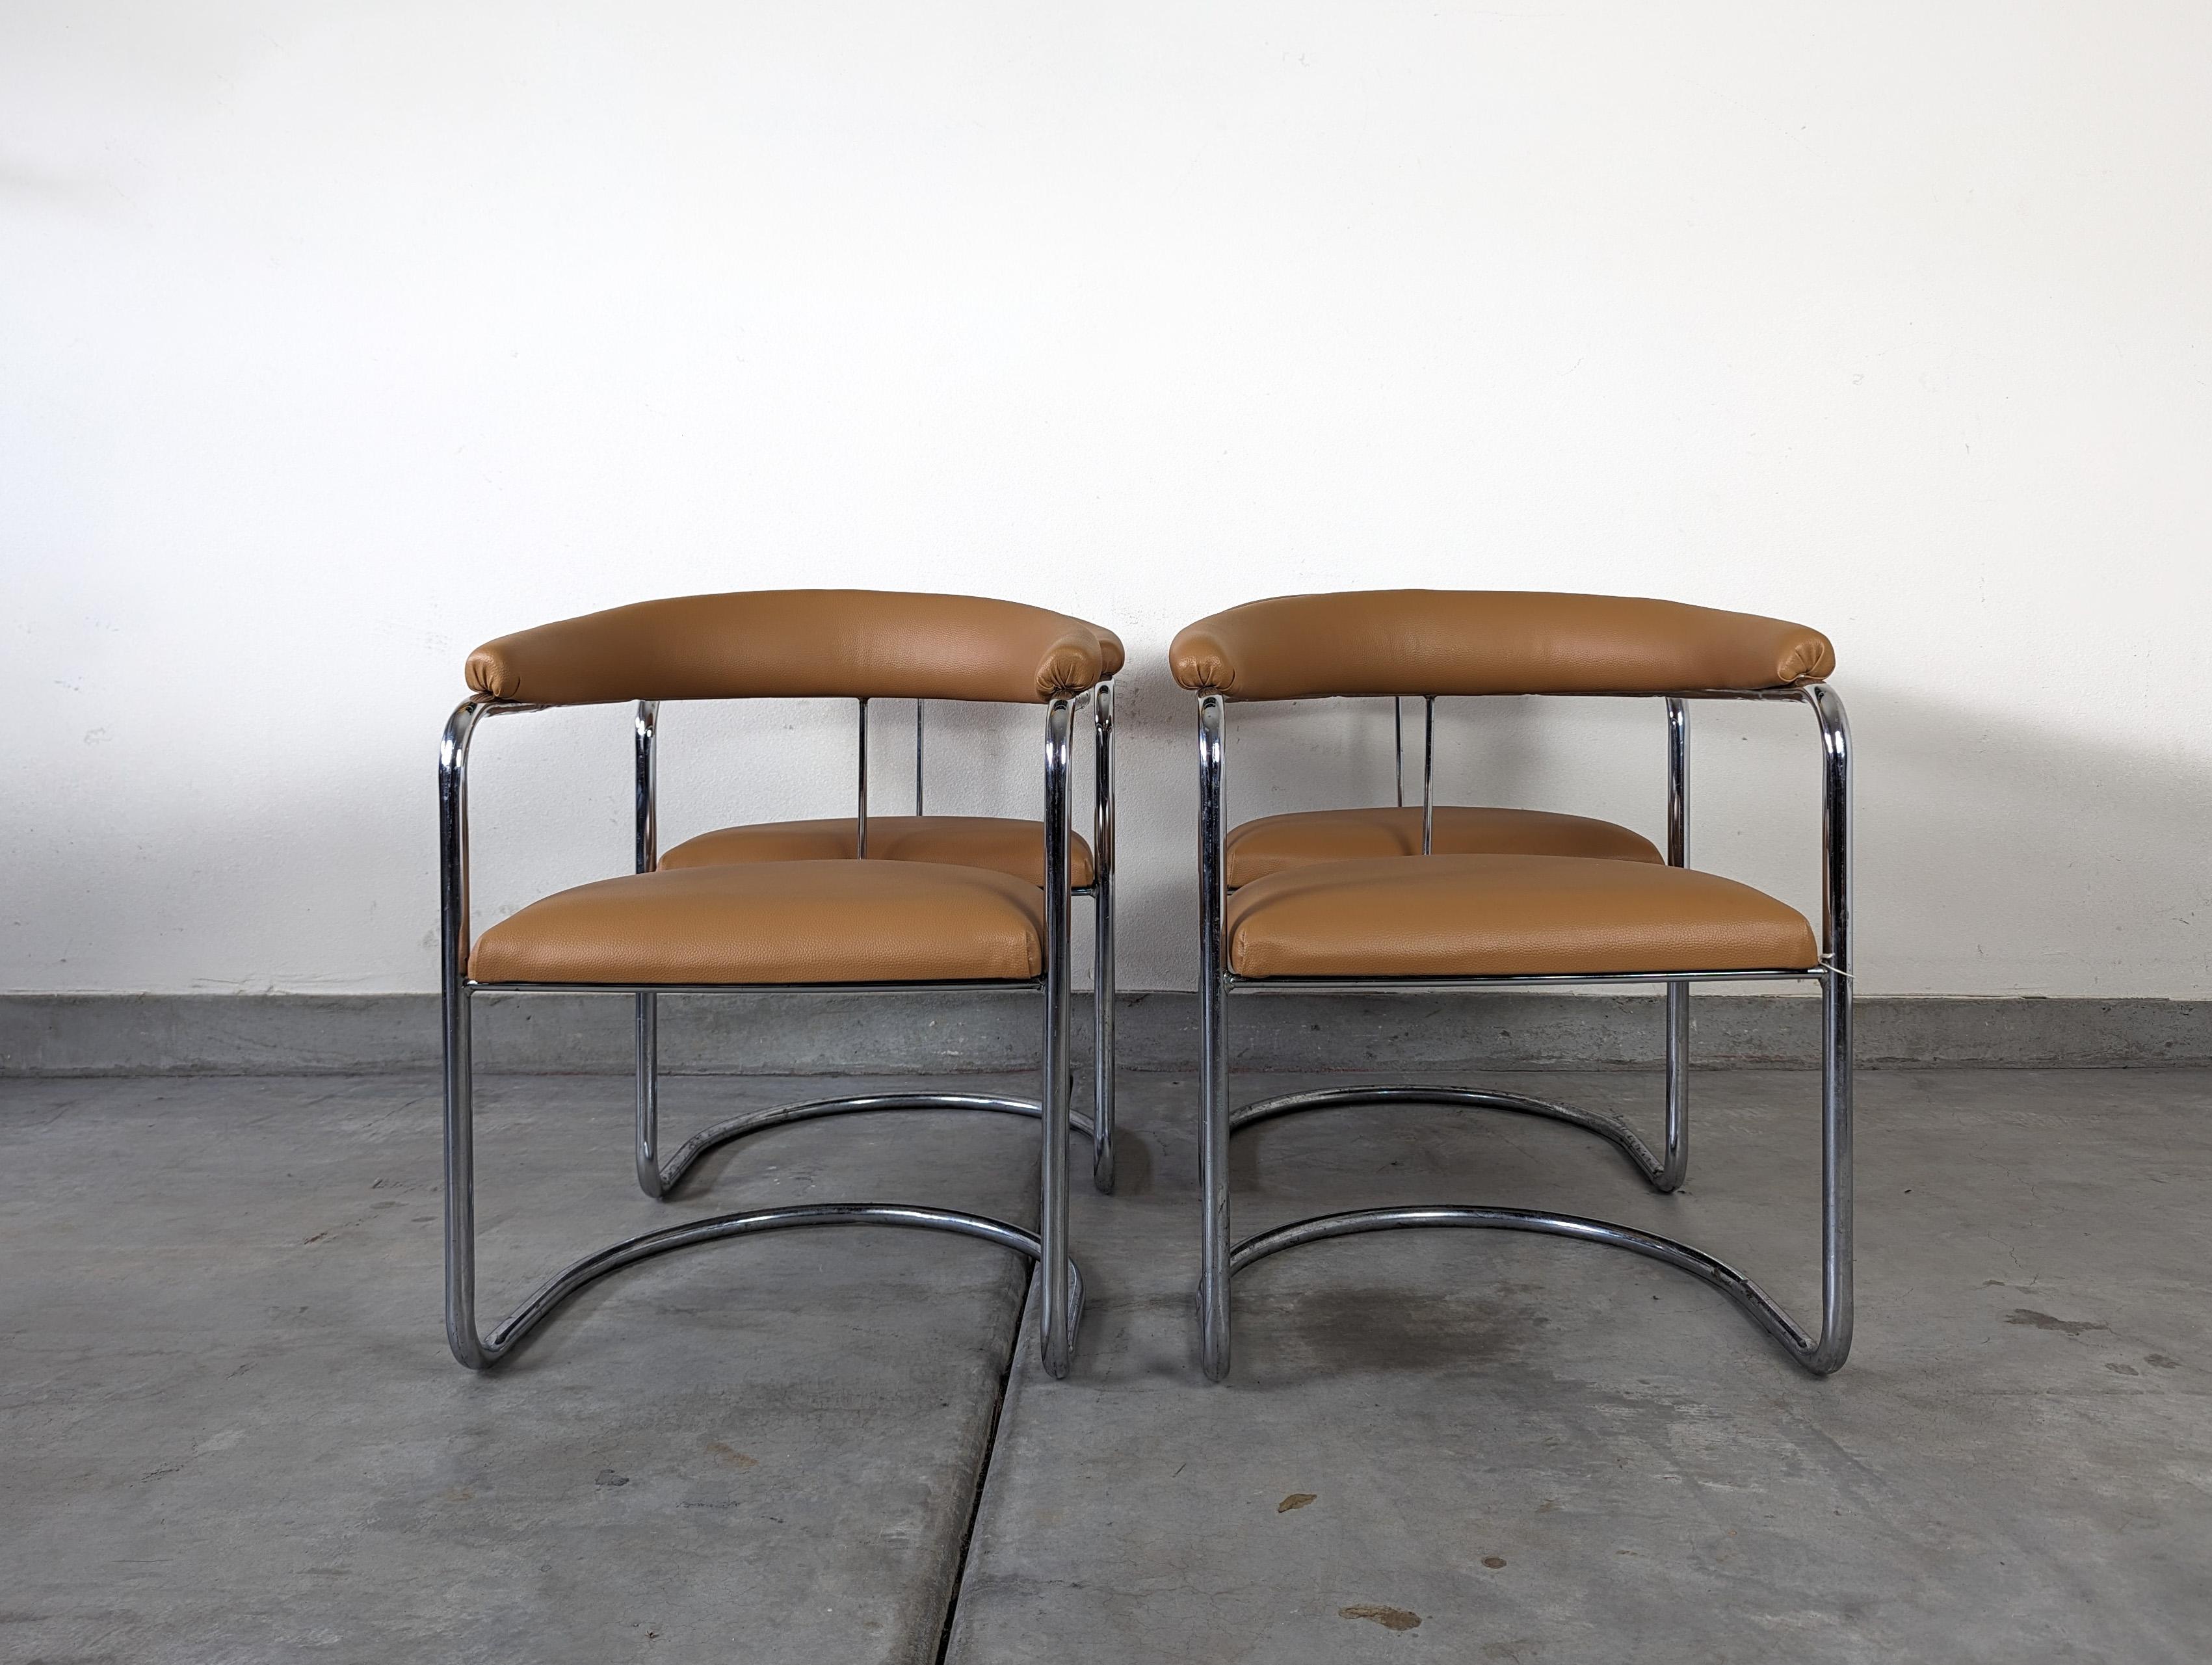 German Mid Century Cantilevered SS33 Armchairs by Anton Lorenz for Thonet, c1970s